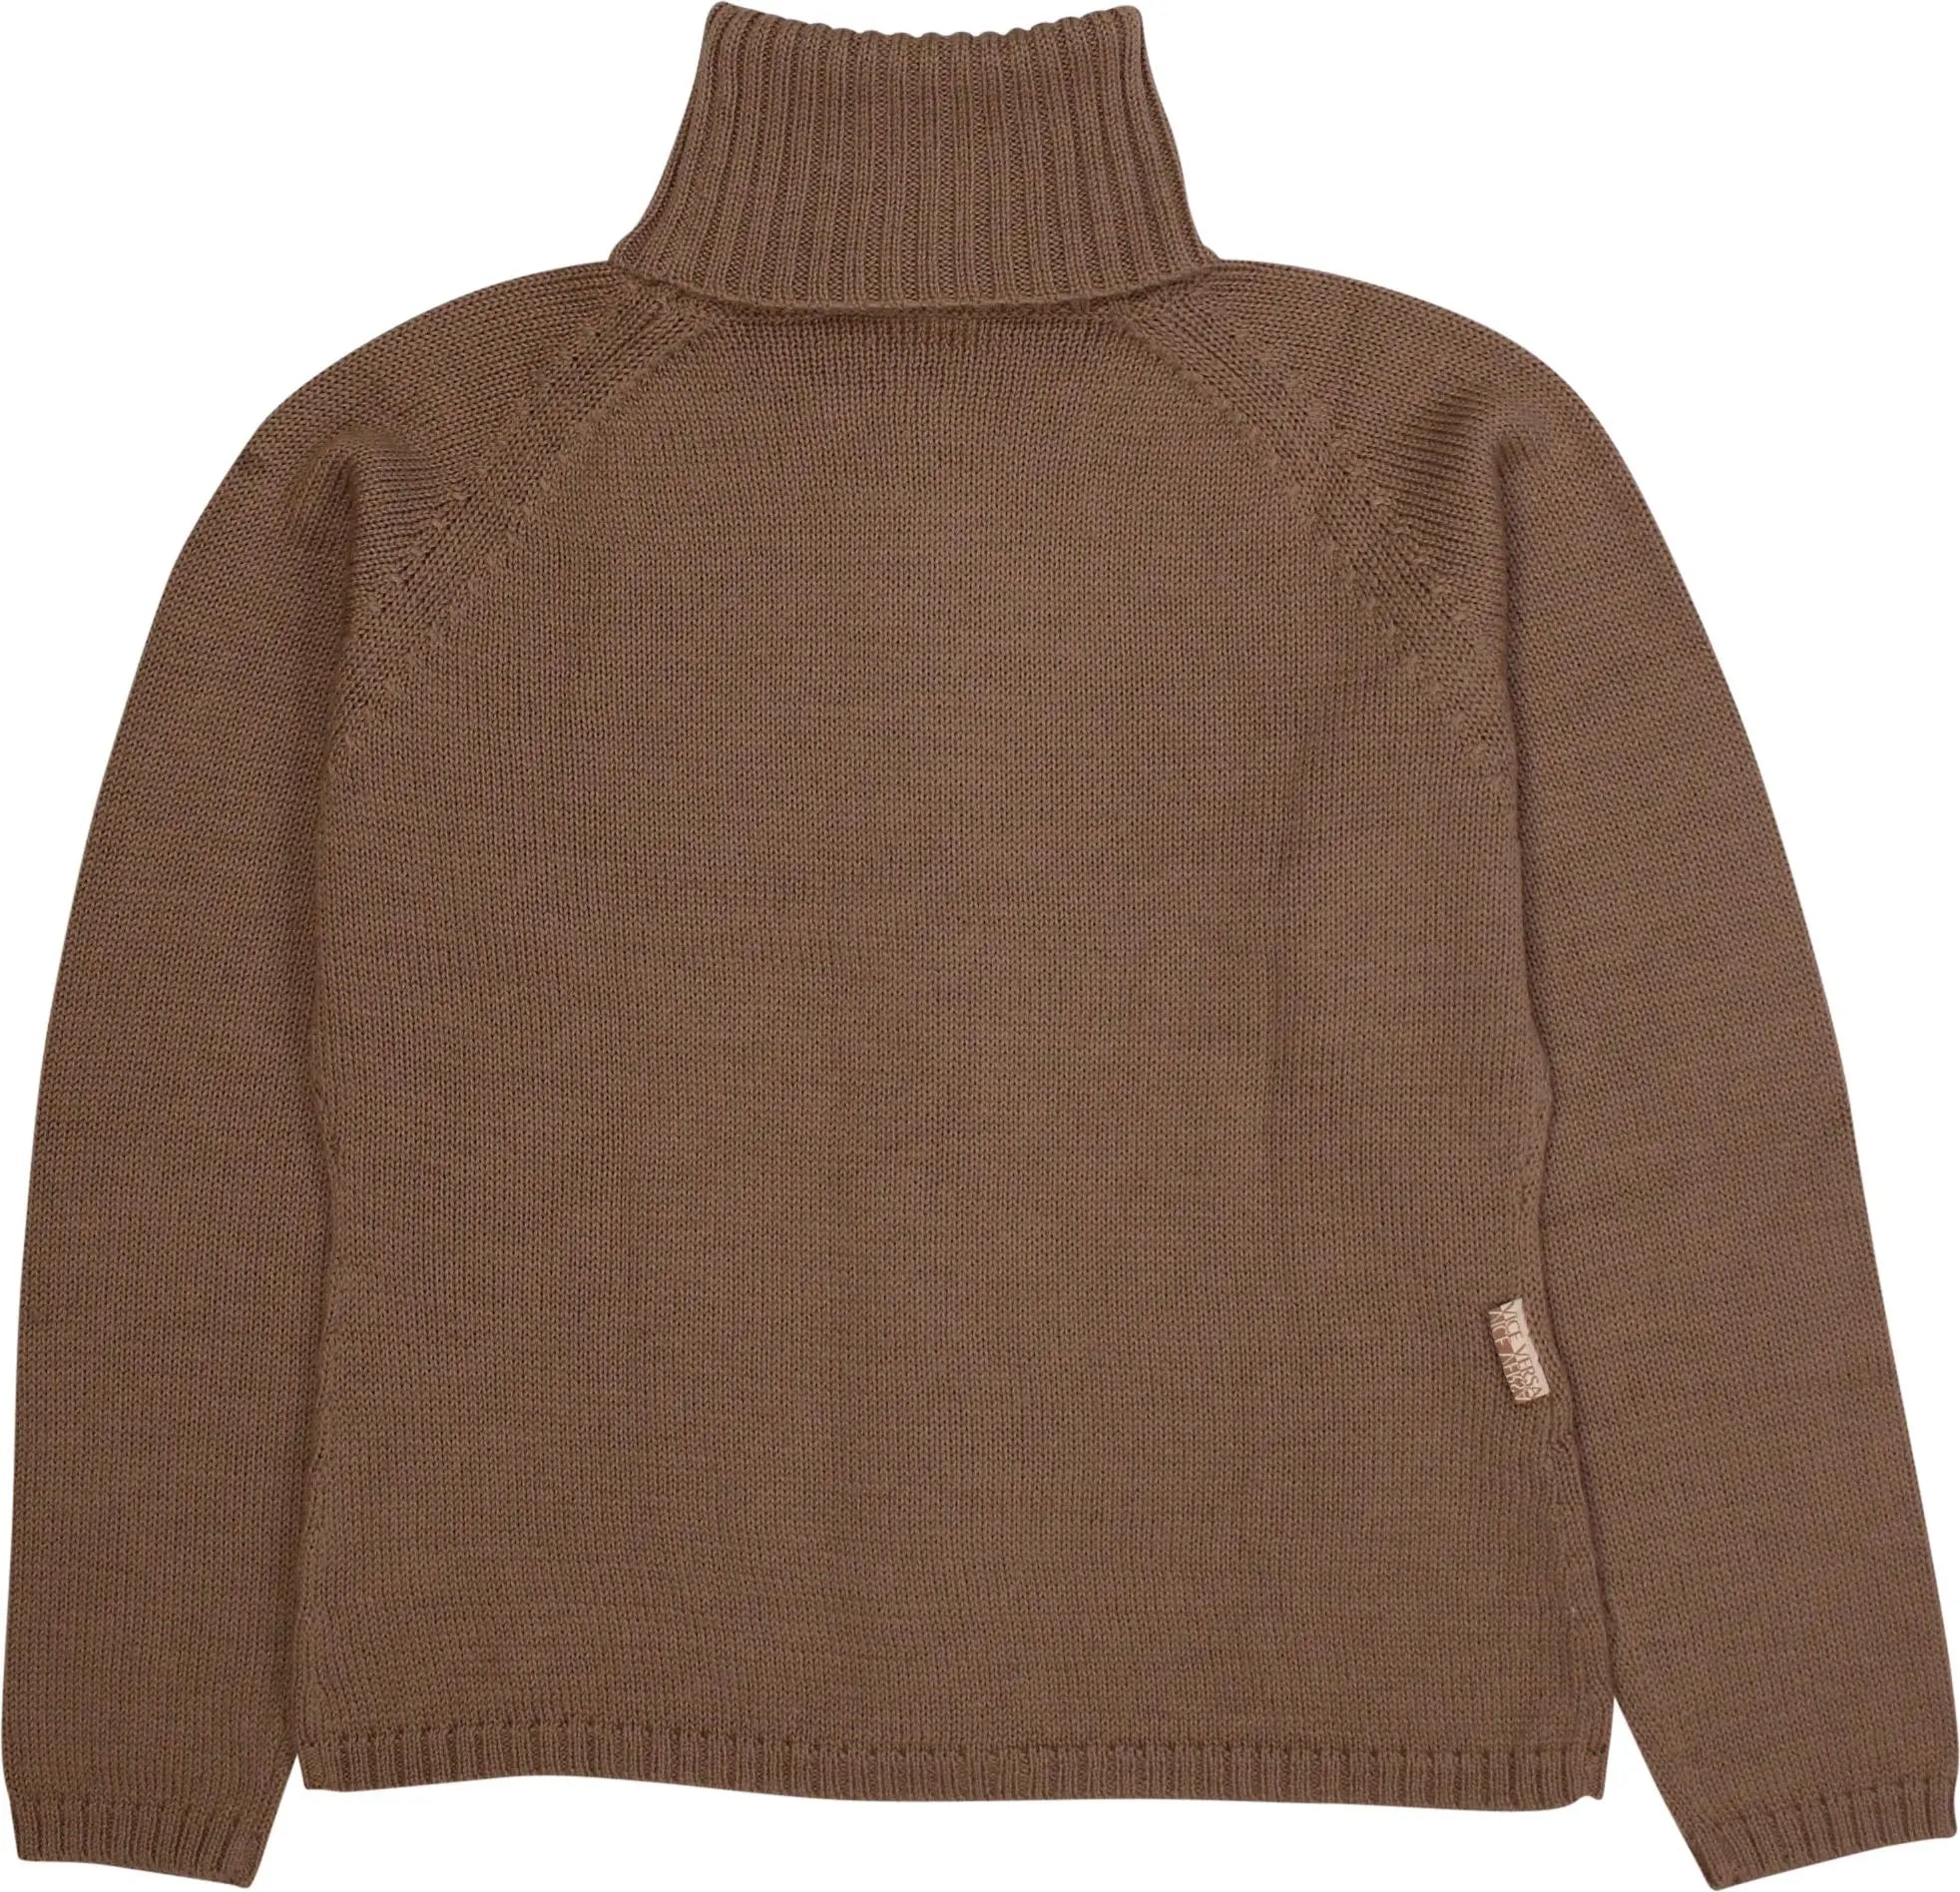 Vice Versa - Wool Blend Brown Knitted Turtleneck Jumper- ThriftTale.com - Vintage and second handclothing